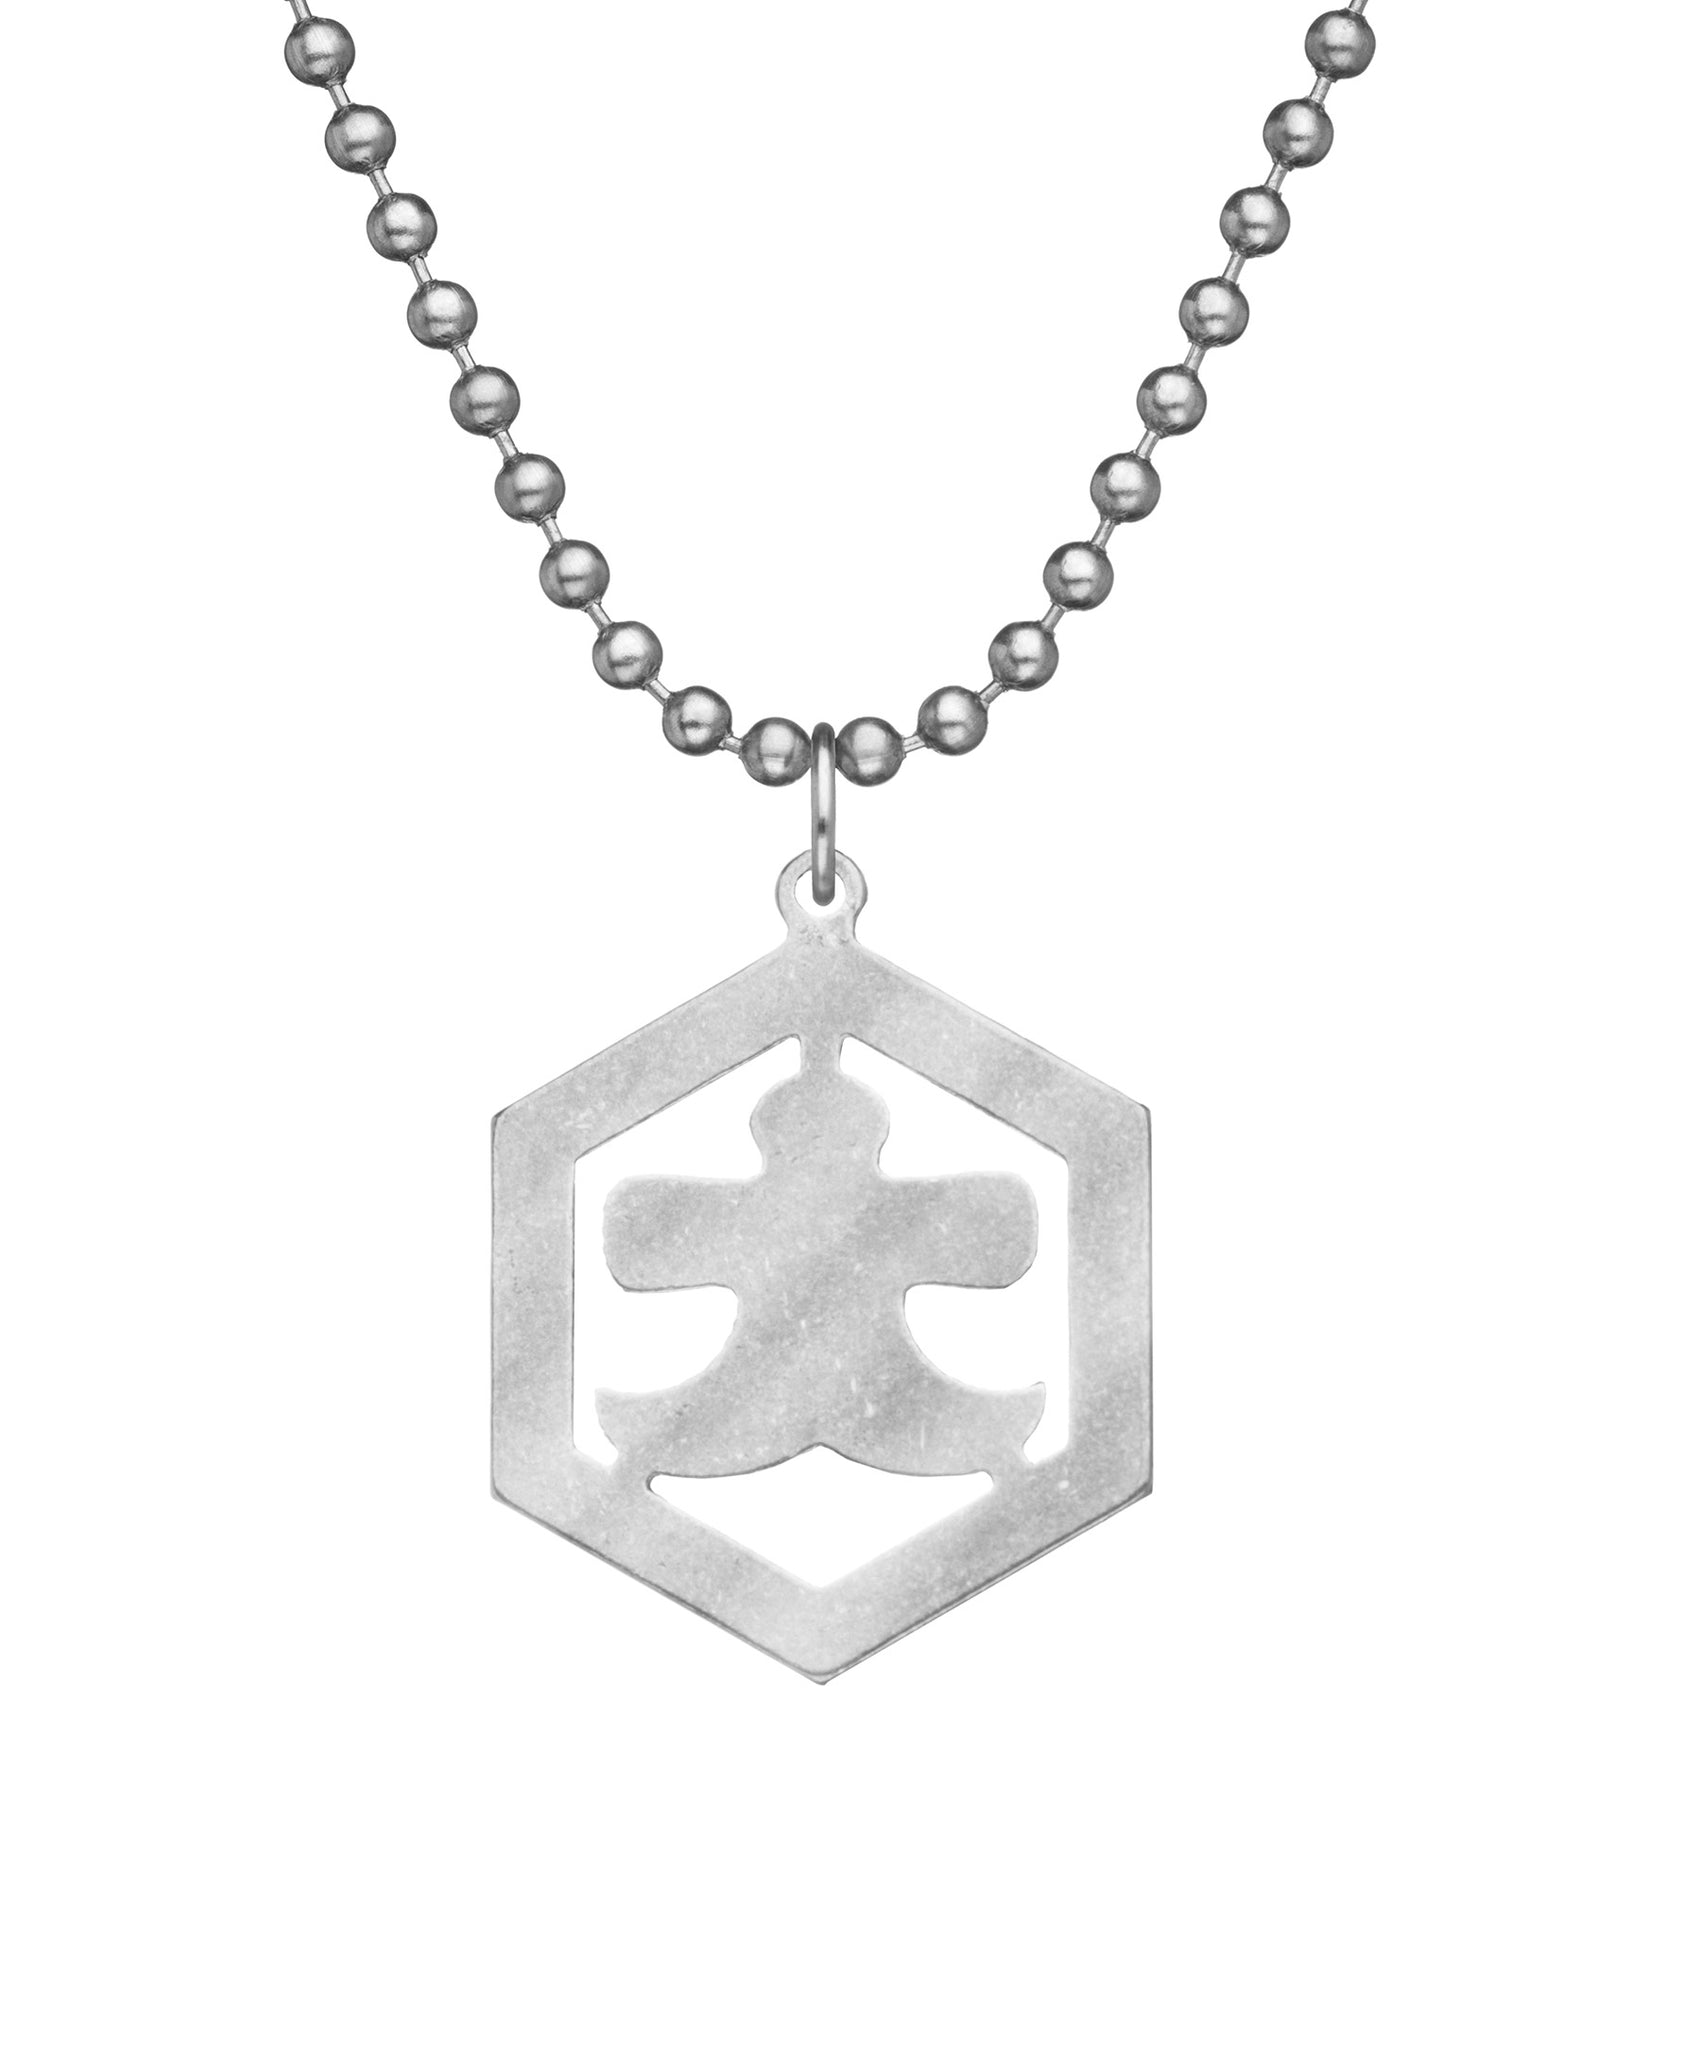 GI JEWELRY Military Issue Stainless Steel Izumo Necklace